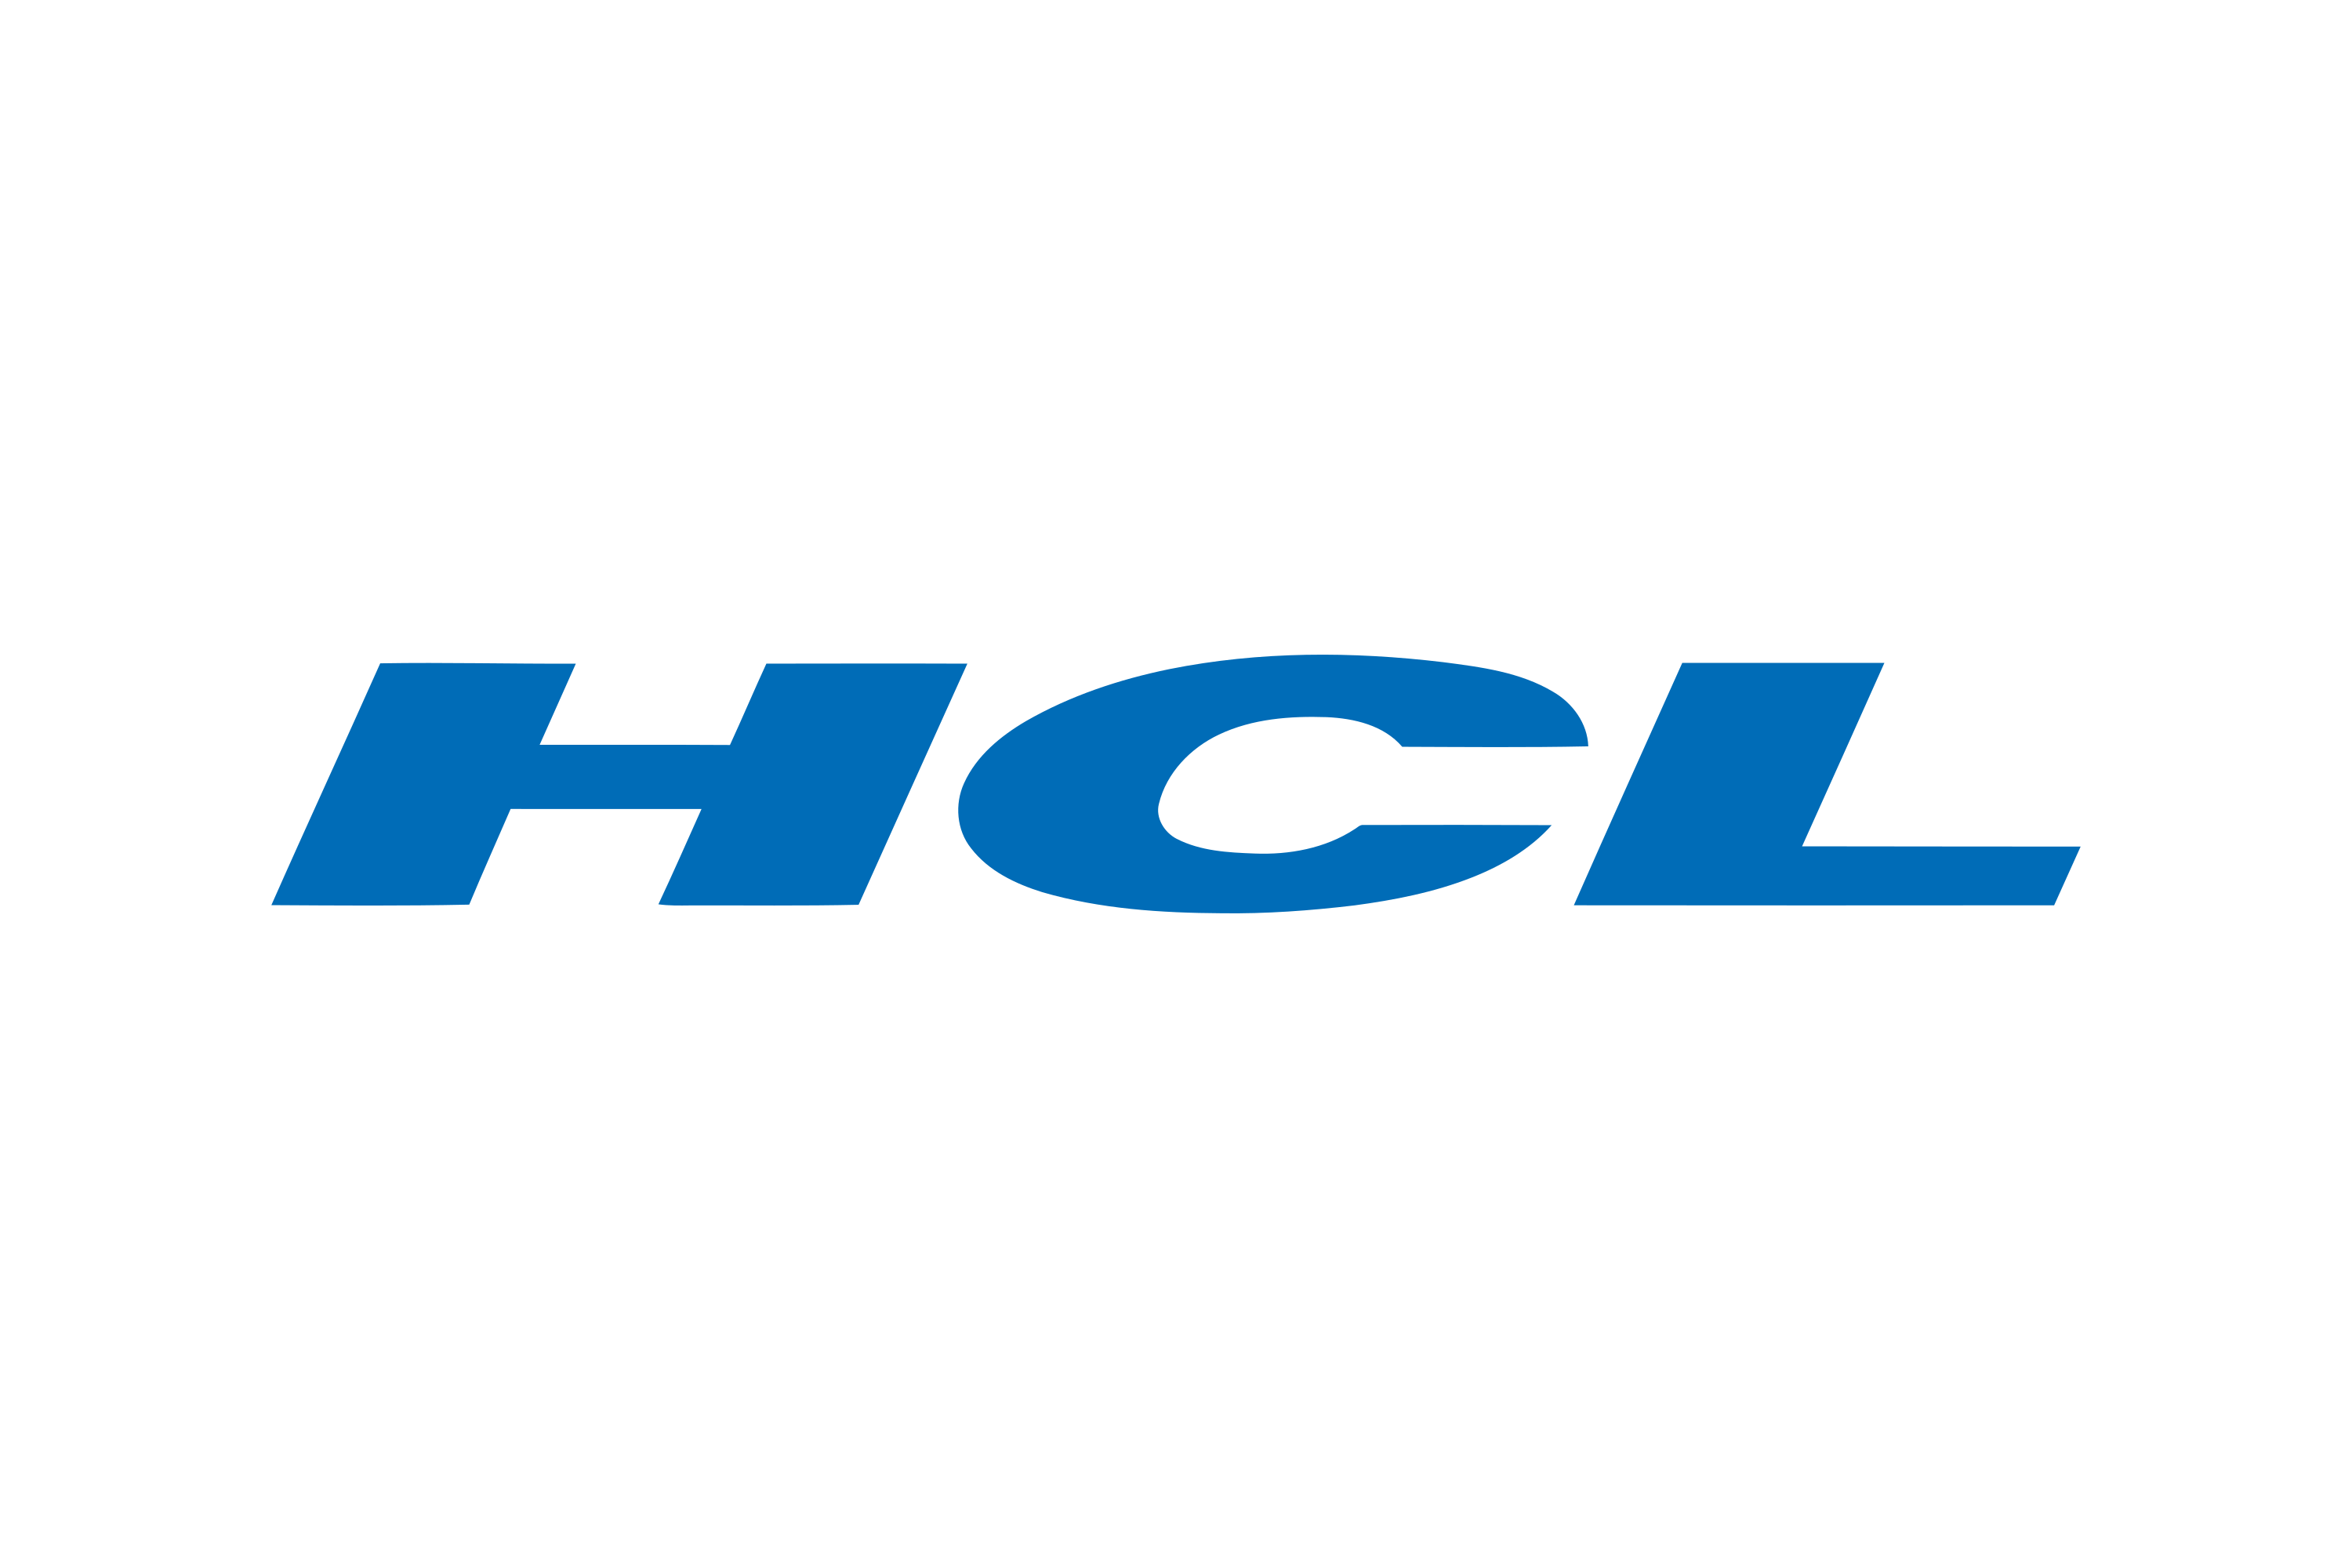 HCL Technologies Stocks Live Updates: HCL Technologies  Sees Price Dip to Rs 1509.6 with 1.41% Decline Today, SMA3 at Rs 1416.93 